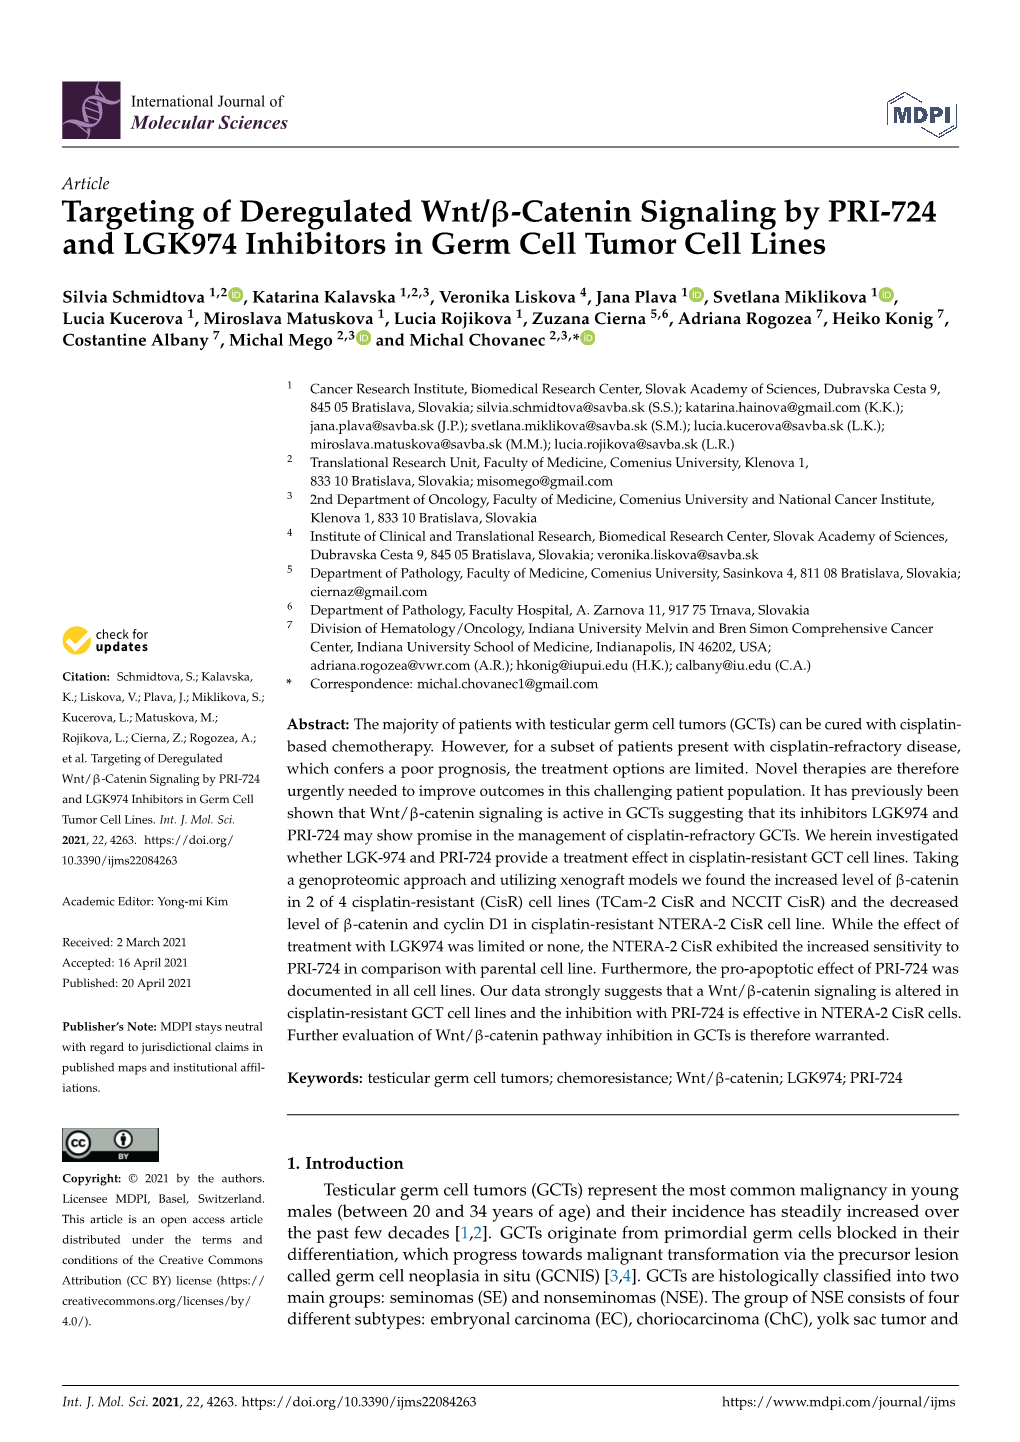 Catenin Signaling by PRI-724 and LGK974 Inhibitors in Germ Cell Tumor Cell Lines